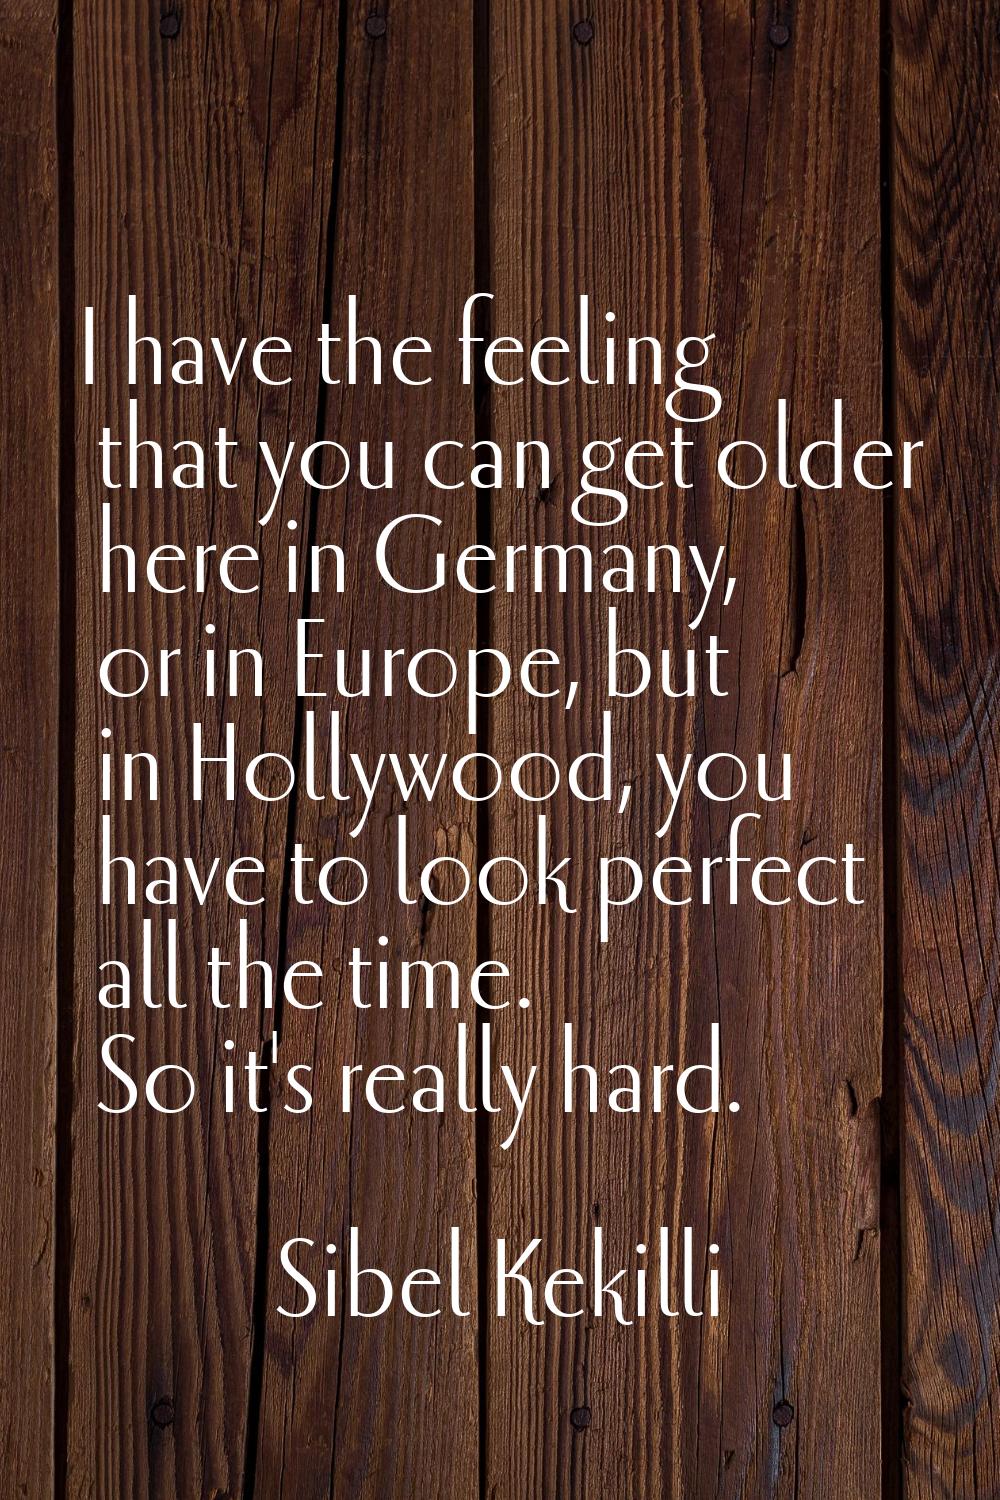 I have the feeling that you can get older here in Germany, or in Europe, but in Hollywood, you have